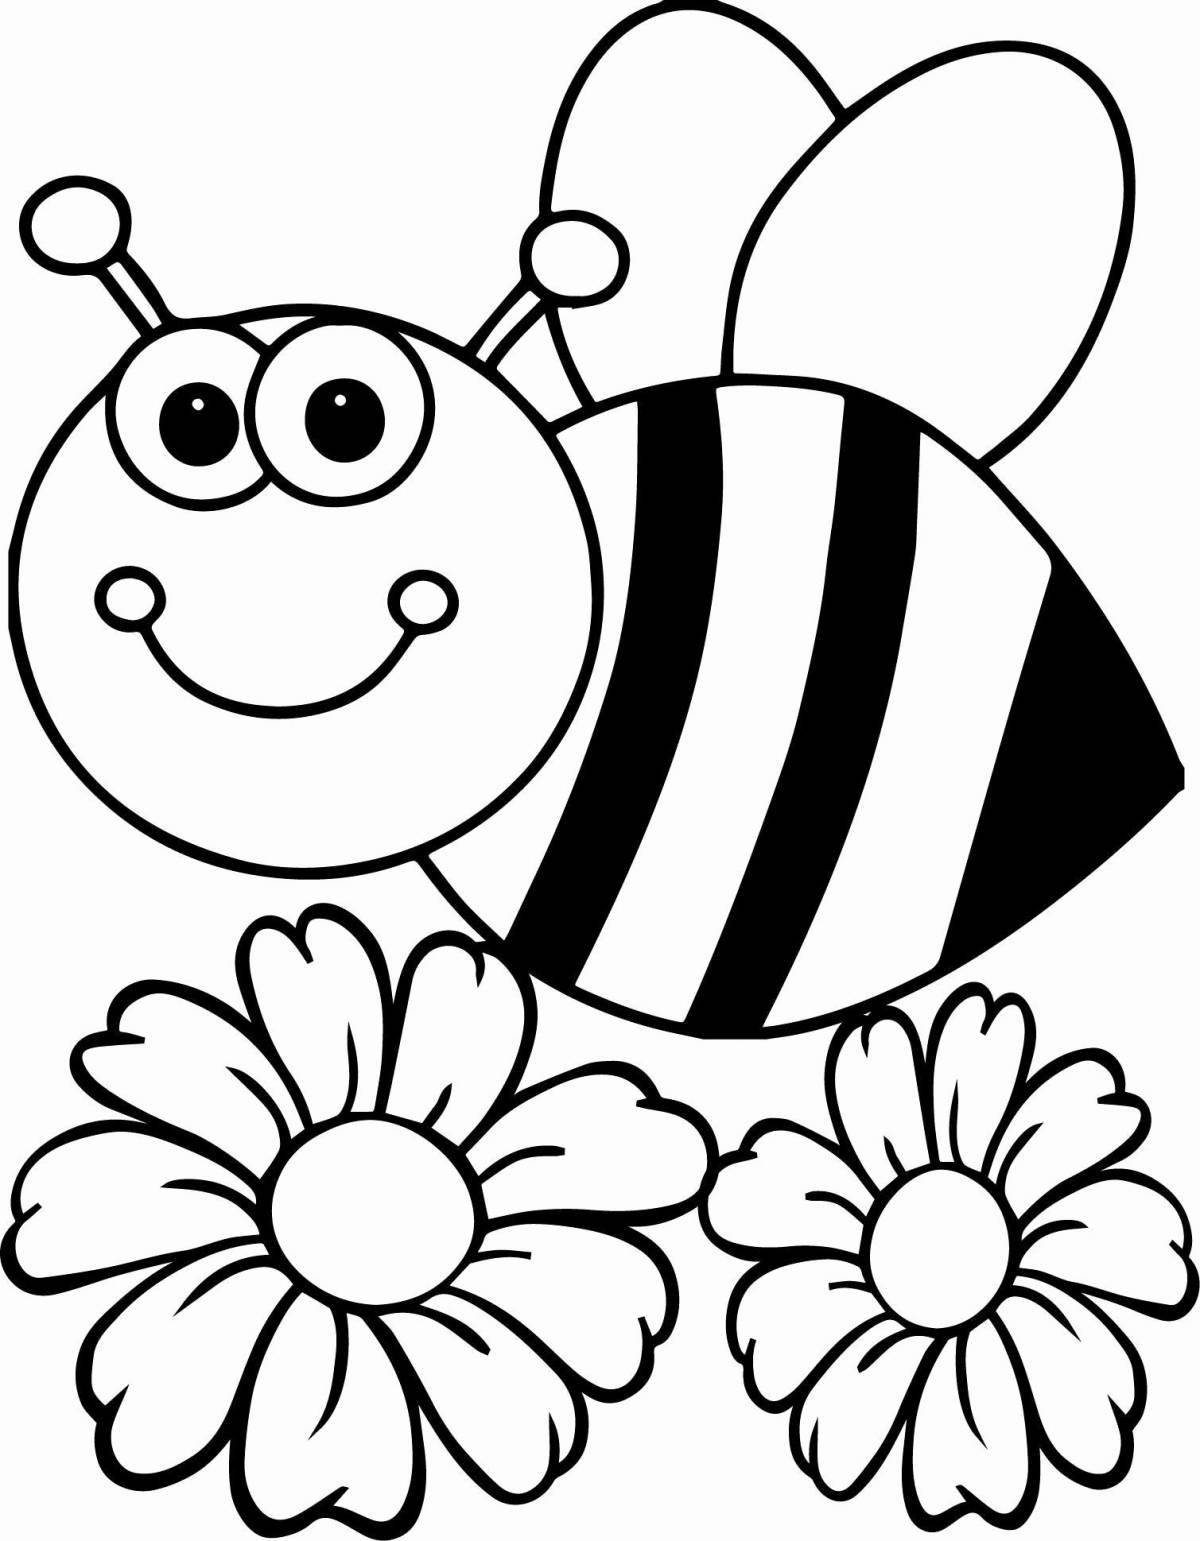 Fabulous bee coloring page for kids